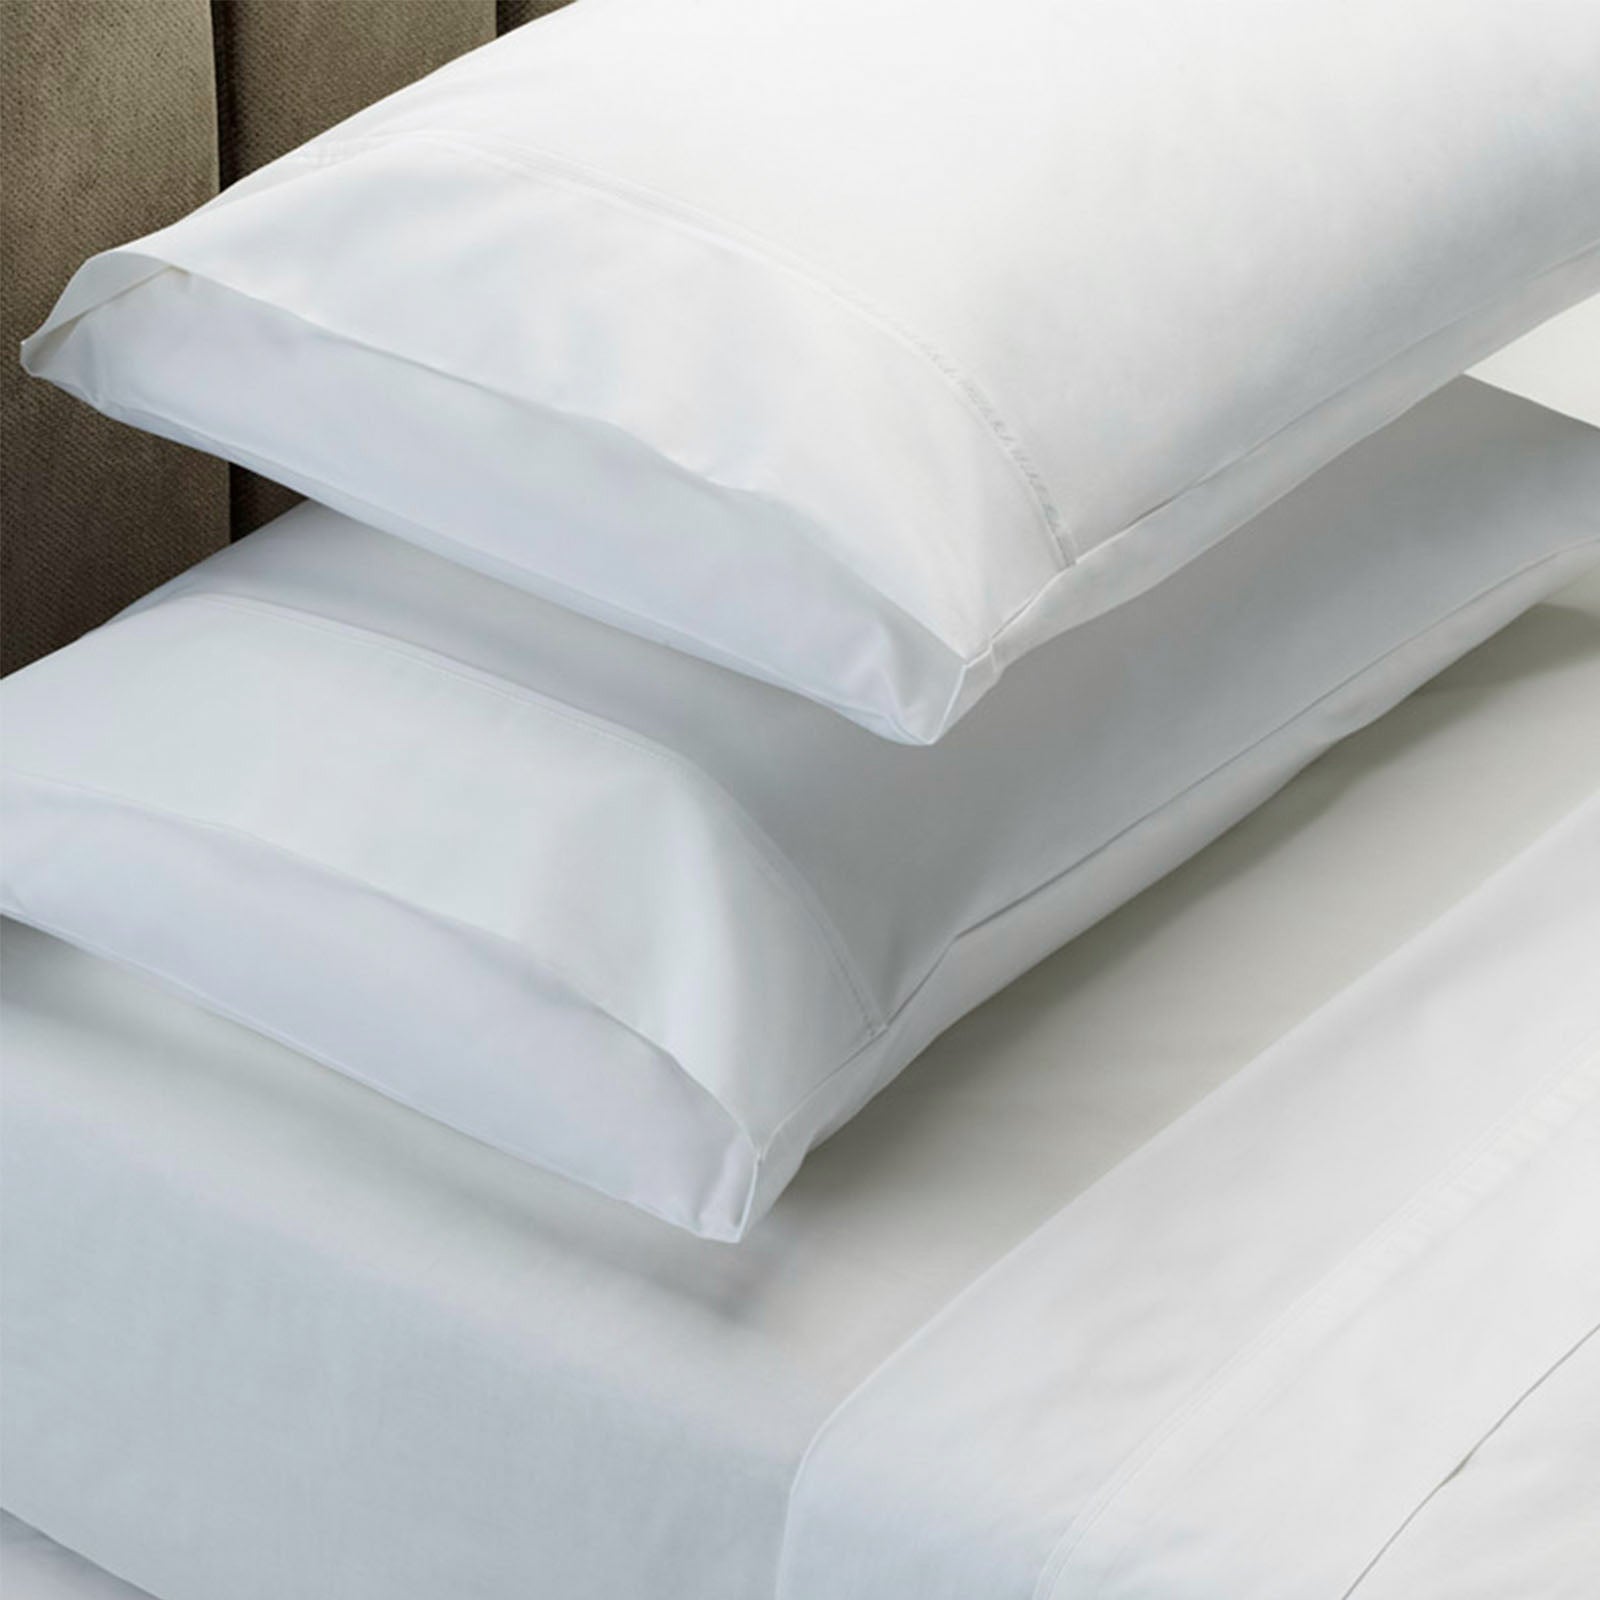 Royal Comfort 1000 Thread Count Sheet Set Cotton Blend Ultra Soft Touch Bedding - King - White-Bed Sheets-PEROZ Accessories